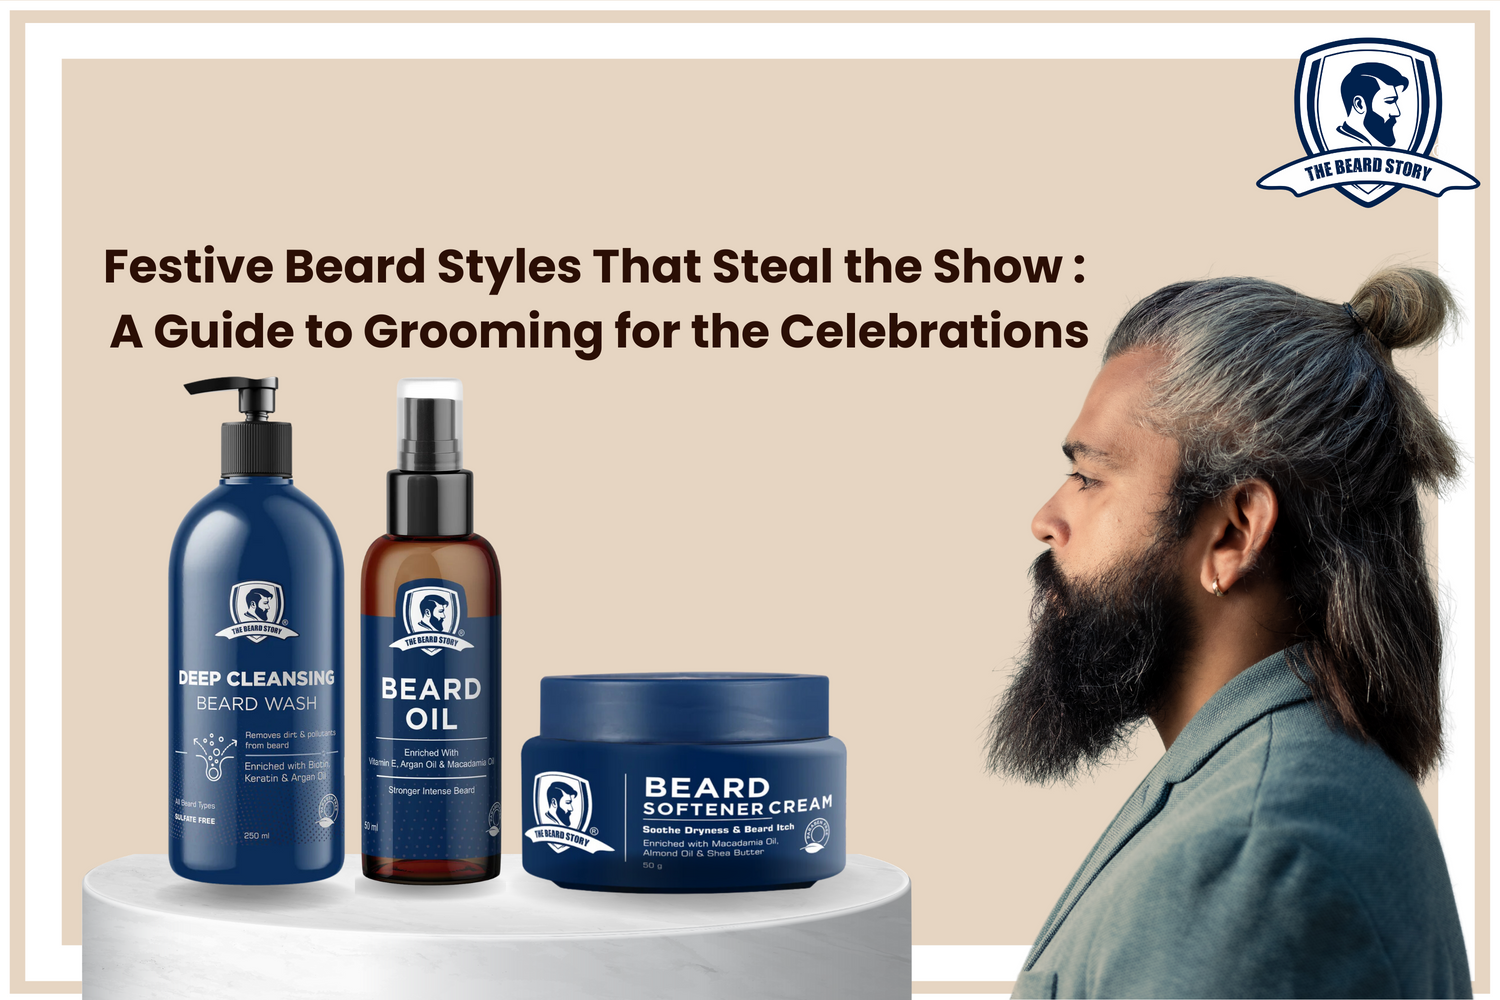 Festive Beard Styles That Steal the Show: A Guide to Grooming for the Celebrations